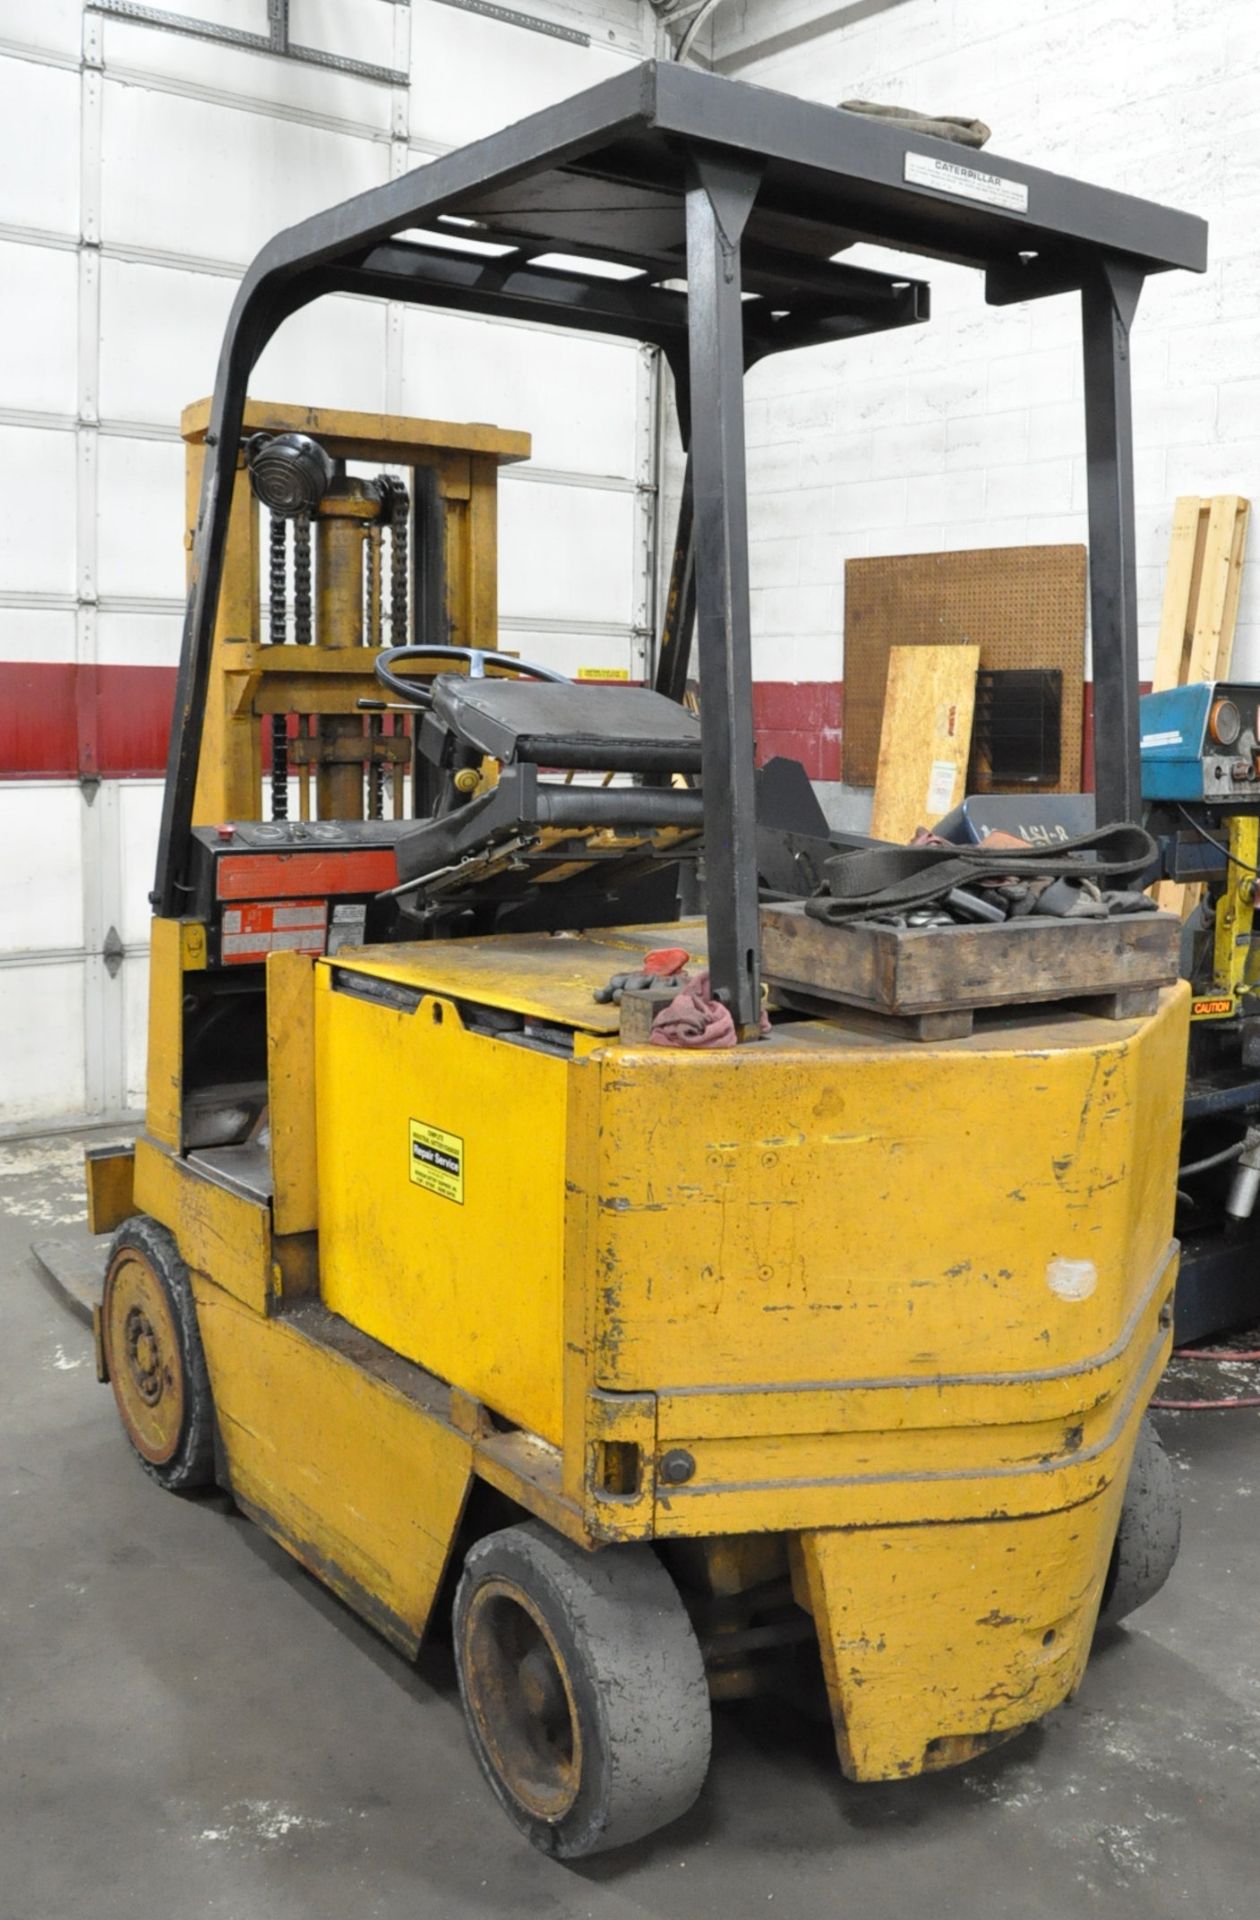 Caterpillar M60 6,000 Lb. Electric Forklift Truck. S/N 67S701 - Image 3 of 7